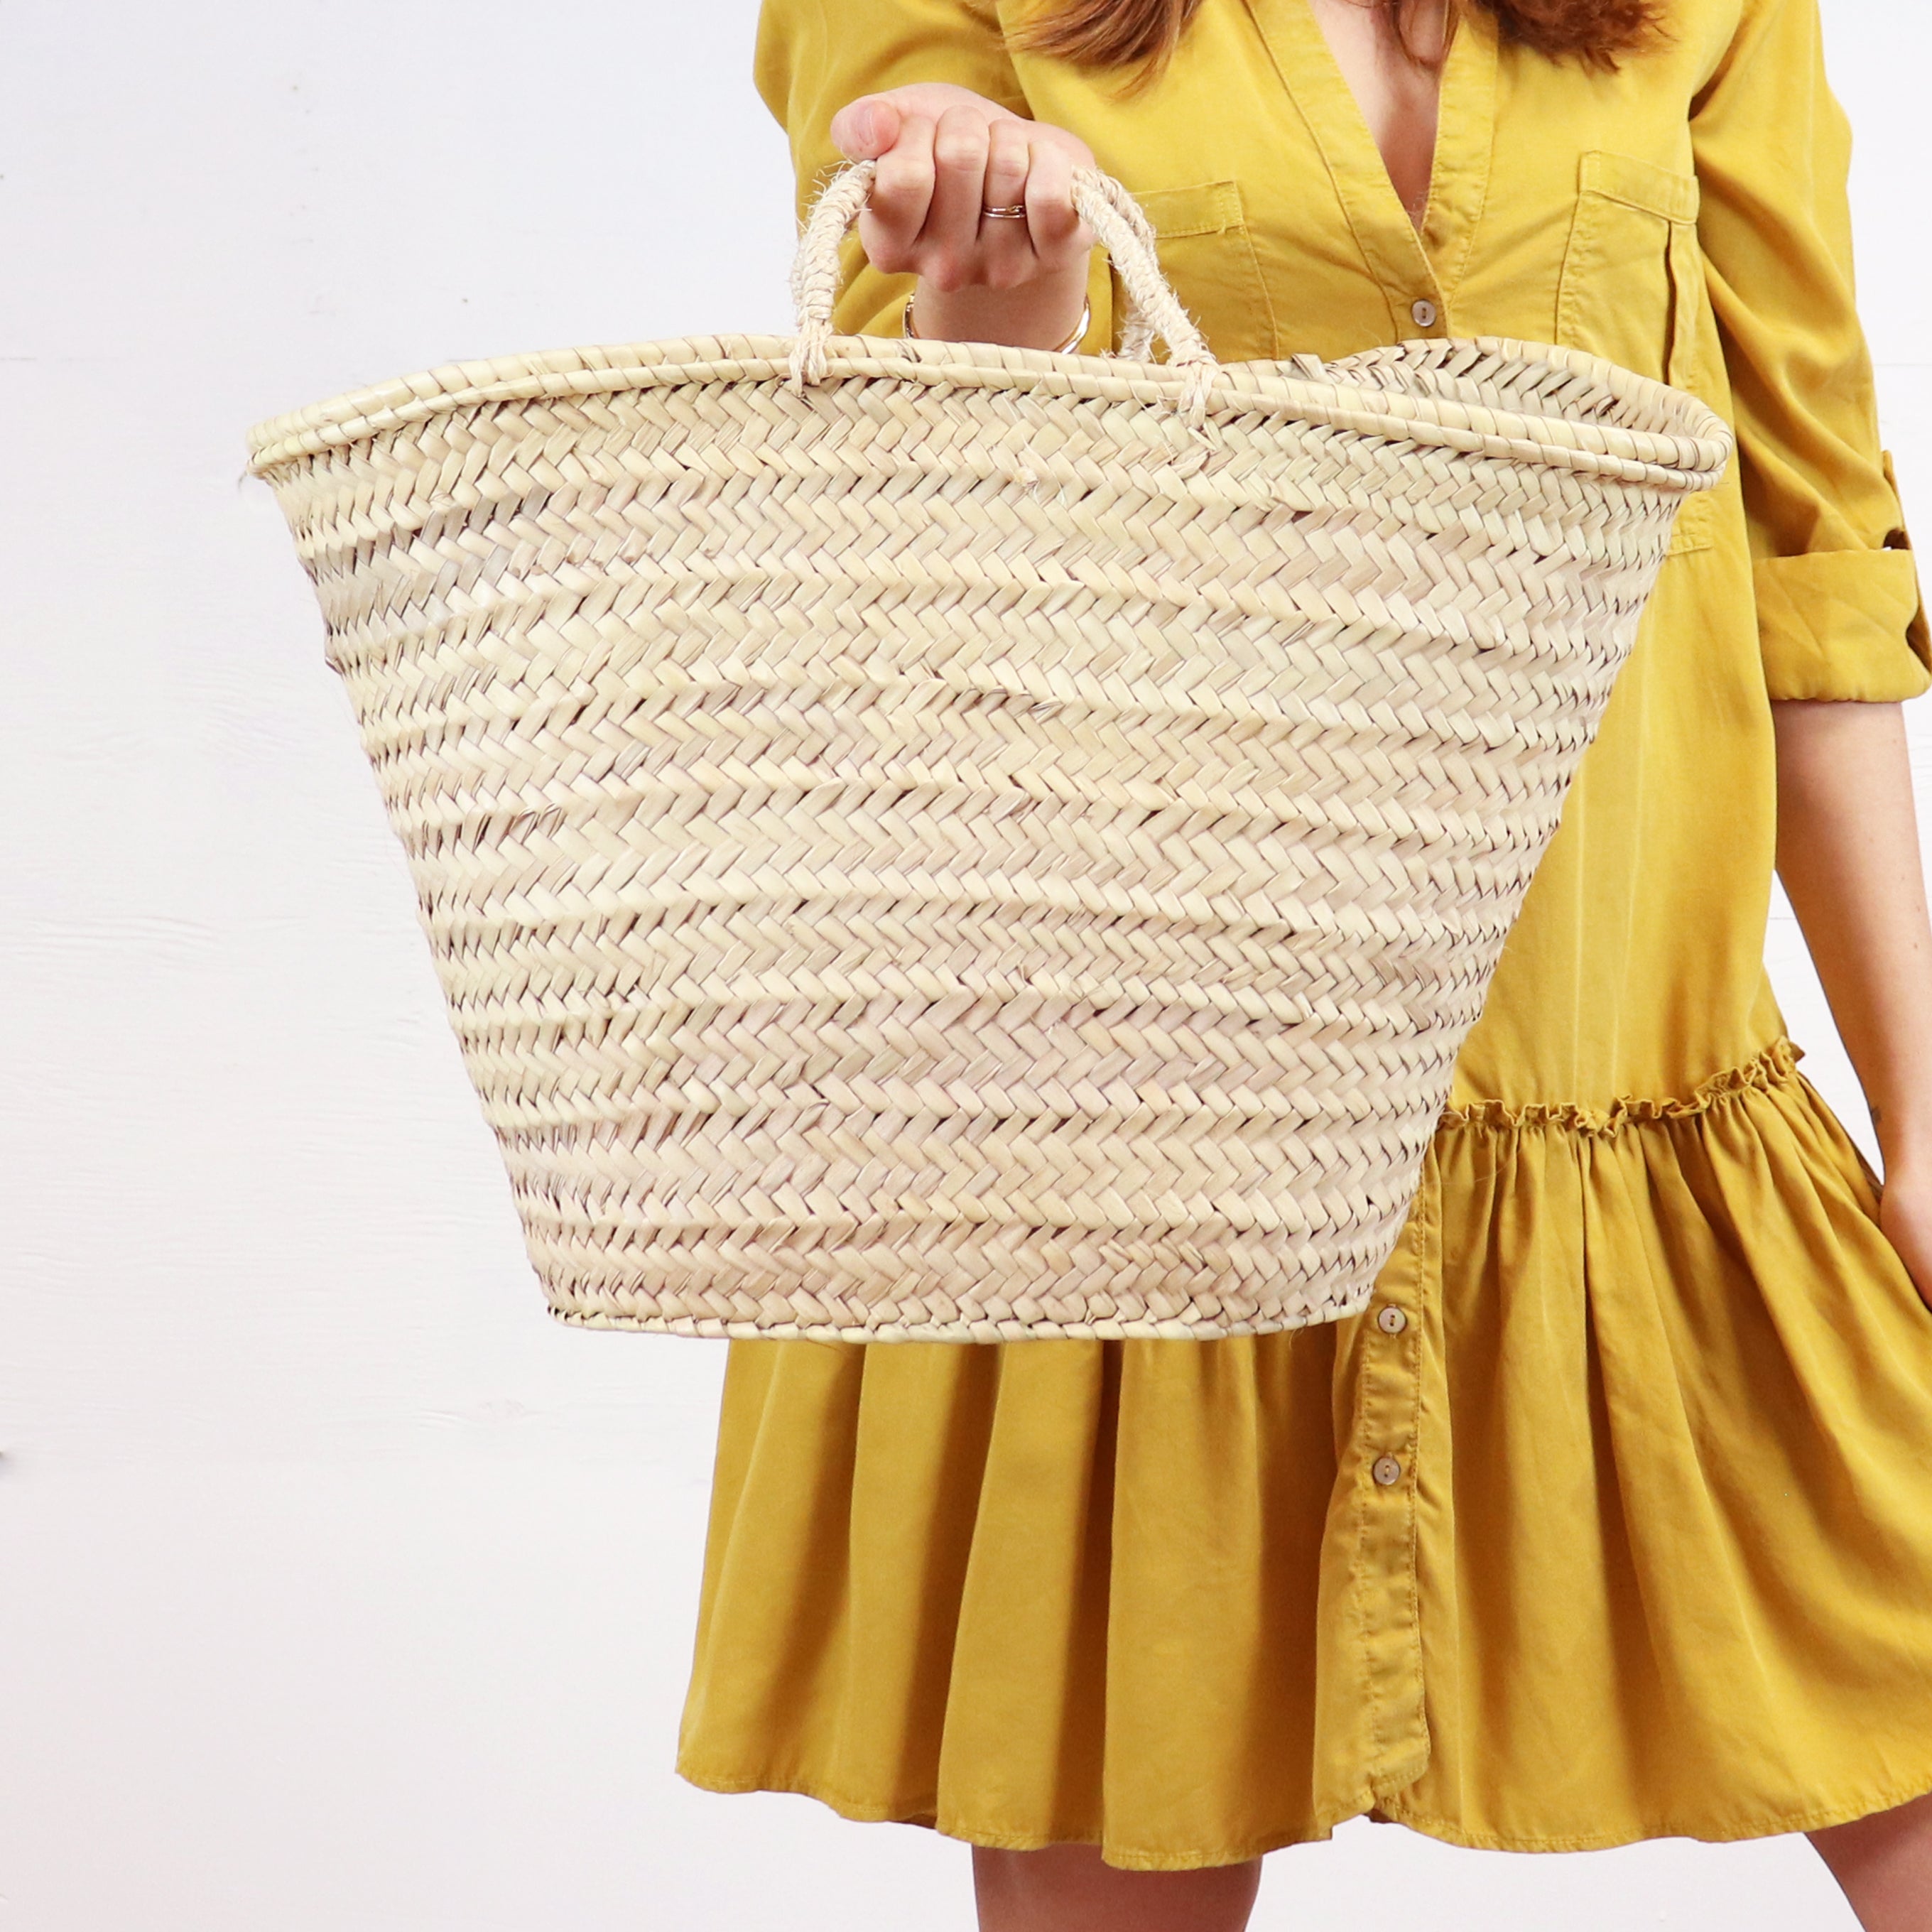 woman holding handwoven straw market basket with straps